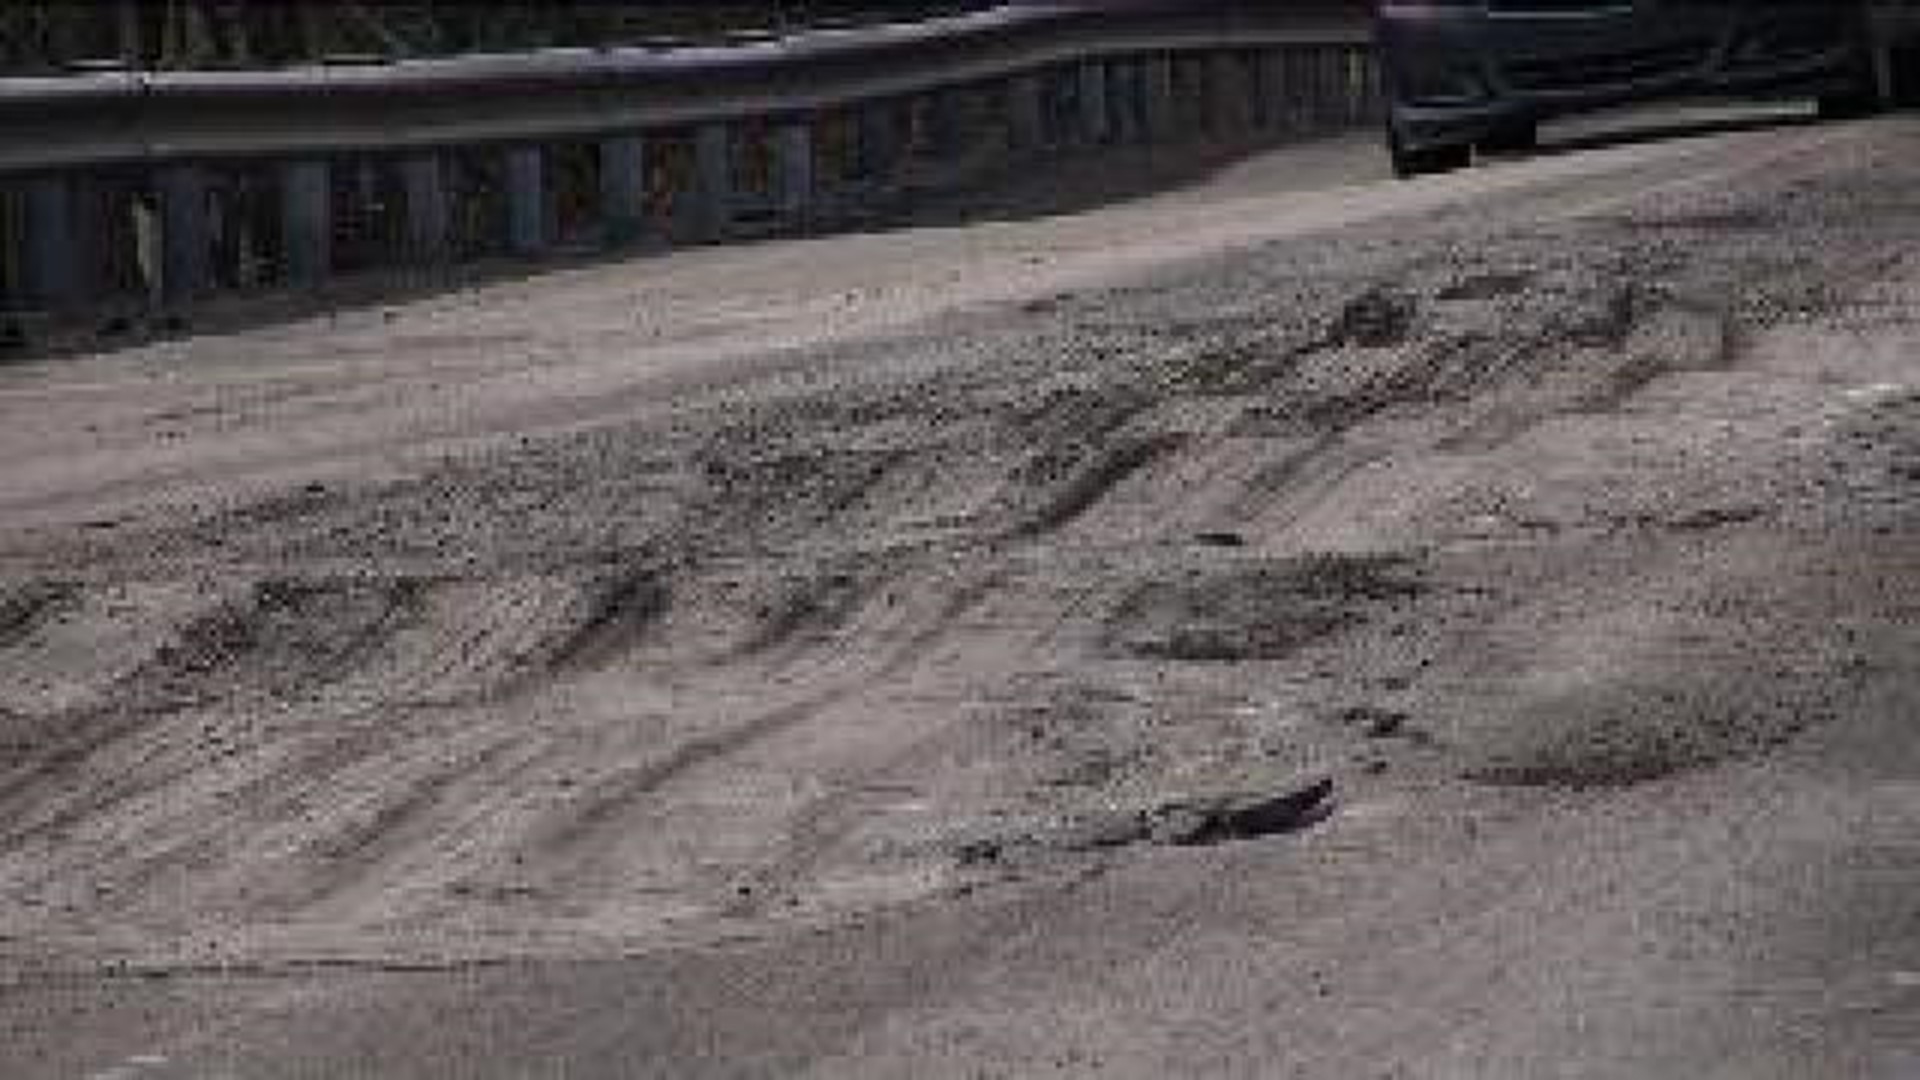 Sinking Road Causing Problems in Susquehanna County